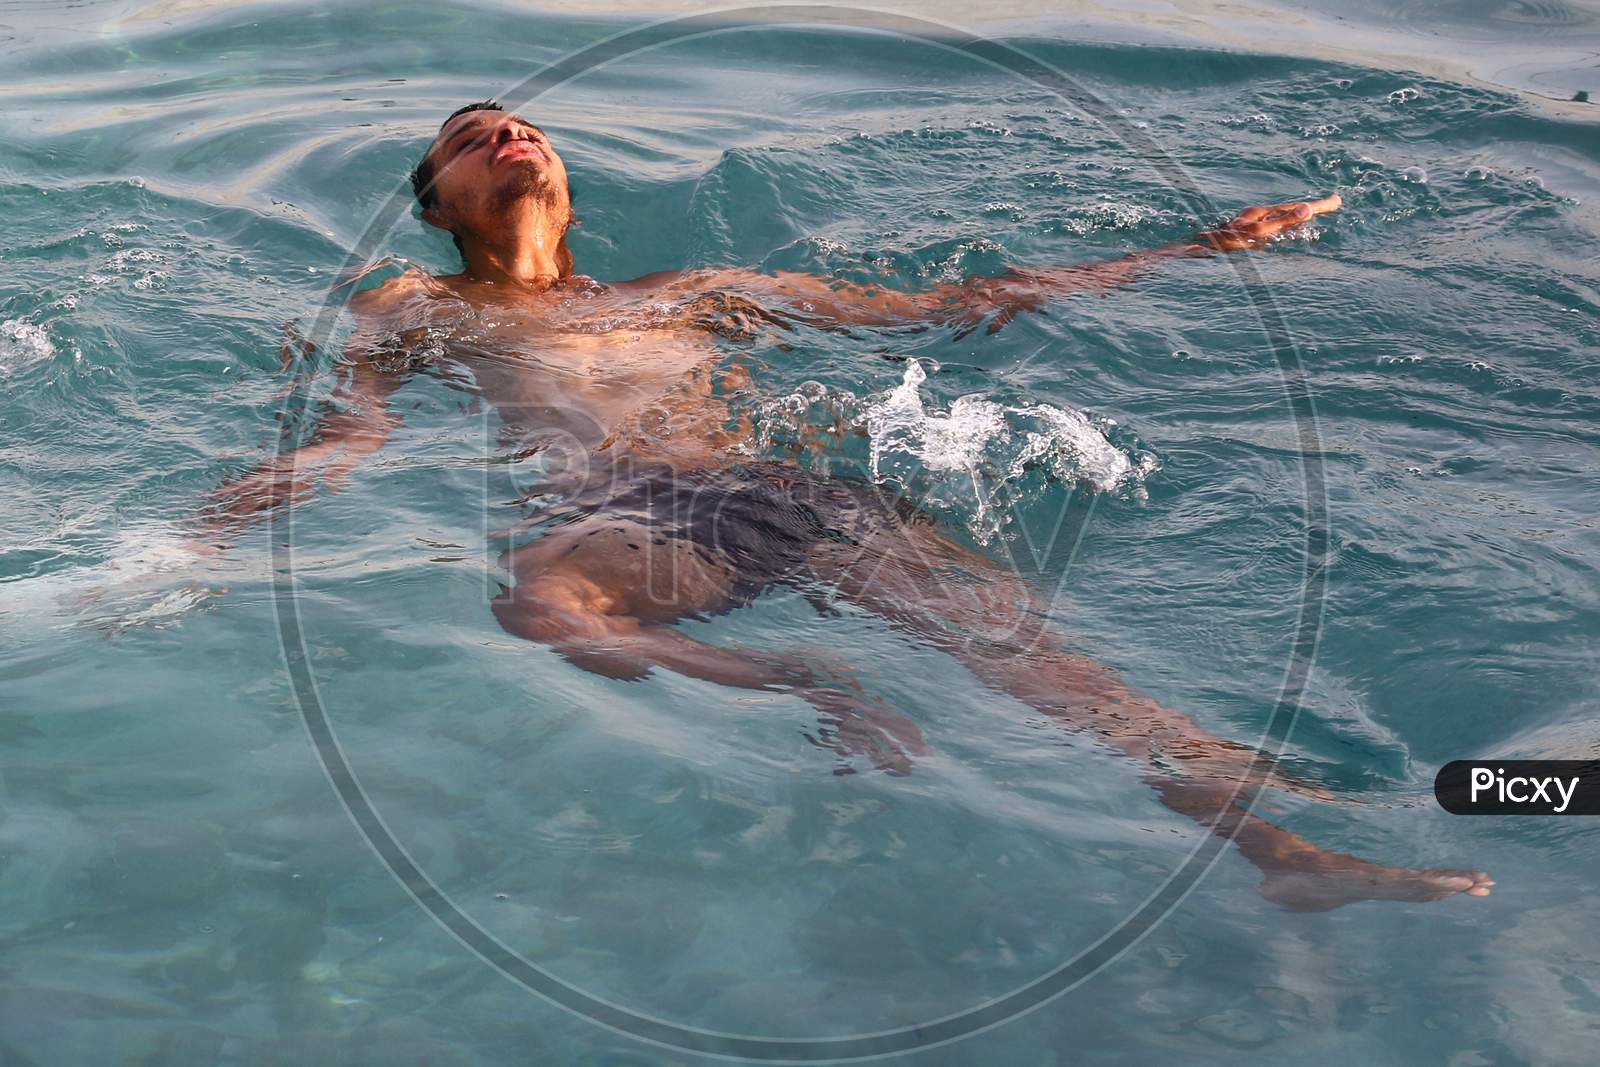 An Indian Man Cools Off Inside a Swimming Pool On A Hot Summer Day In Ajmer, Rajasthan, India On 24 May 2020.